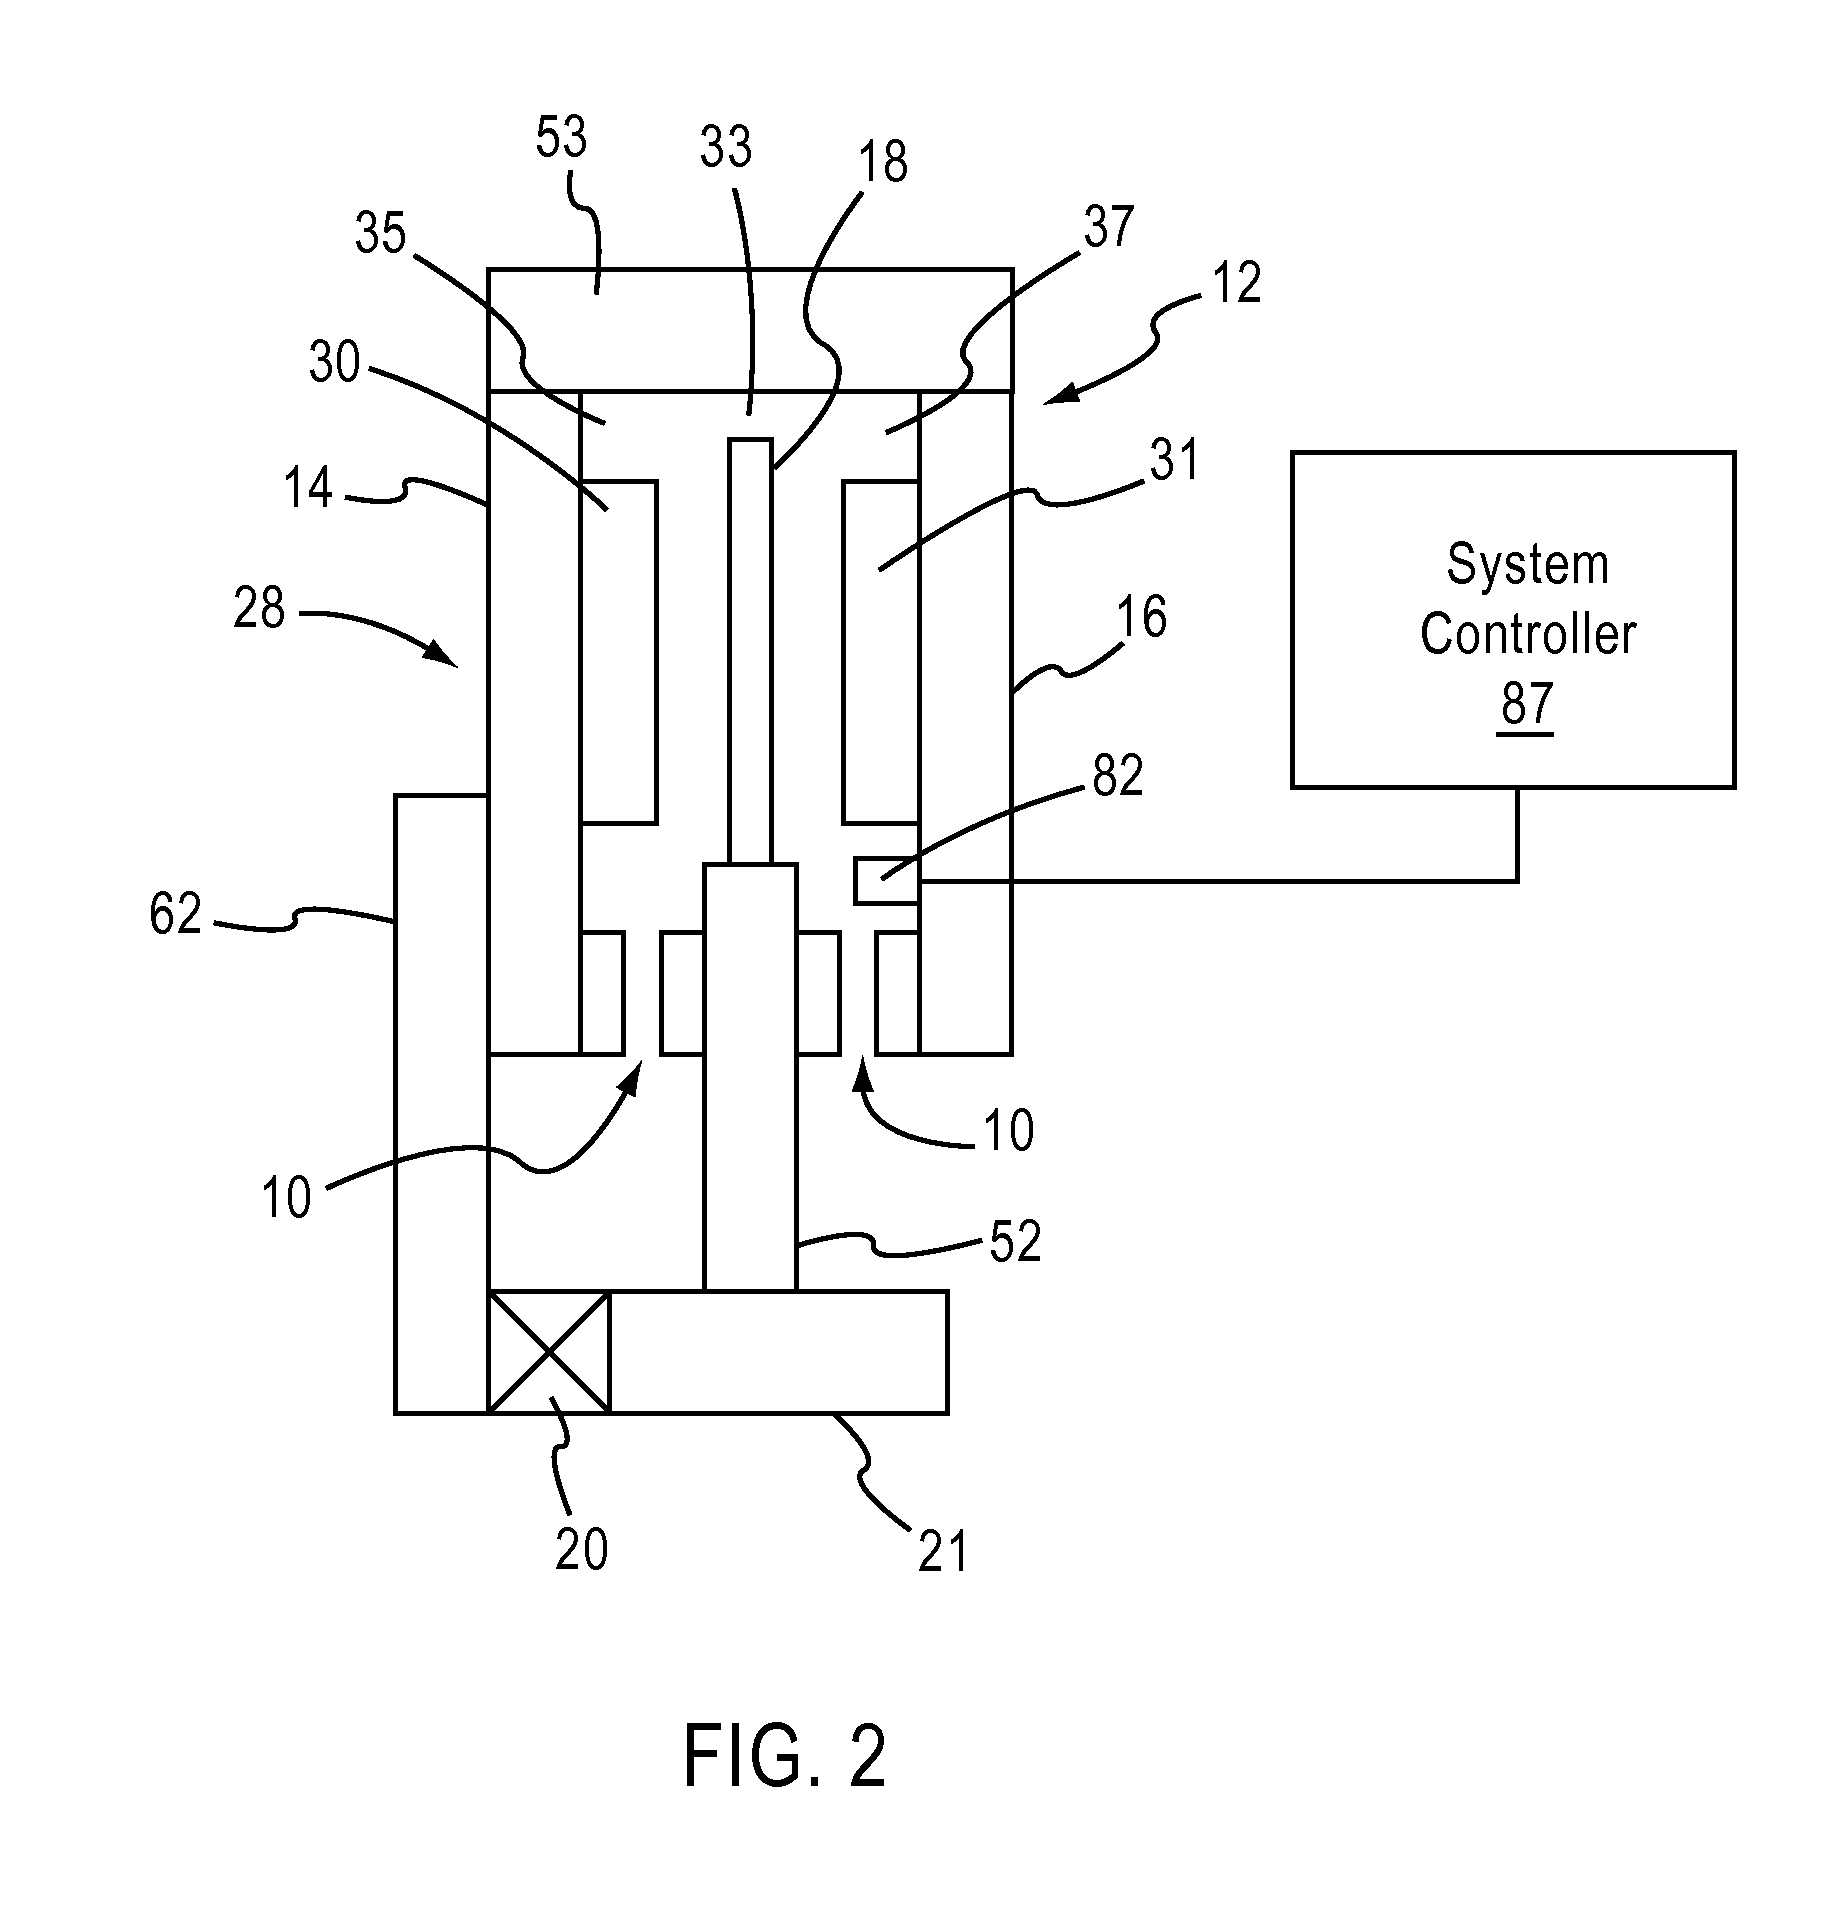 Air gap control systems and methods